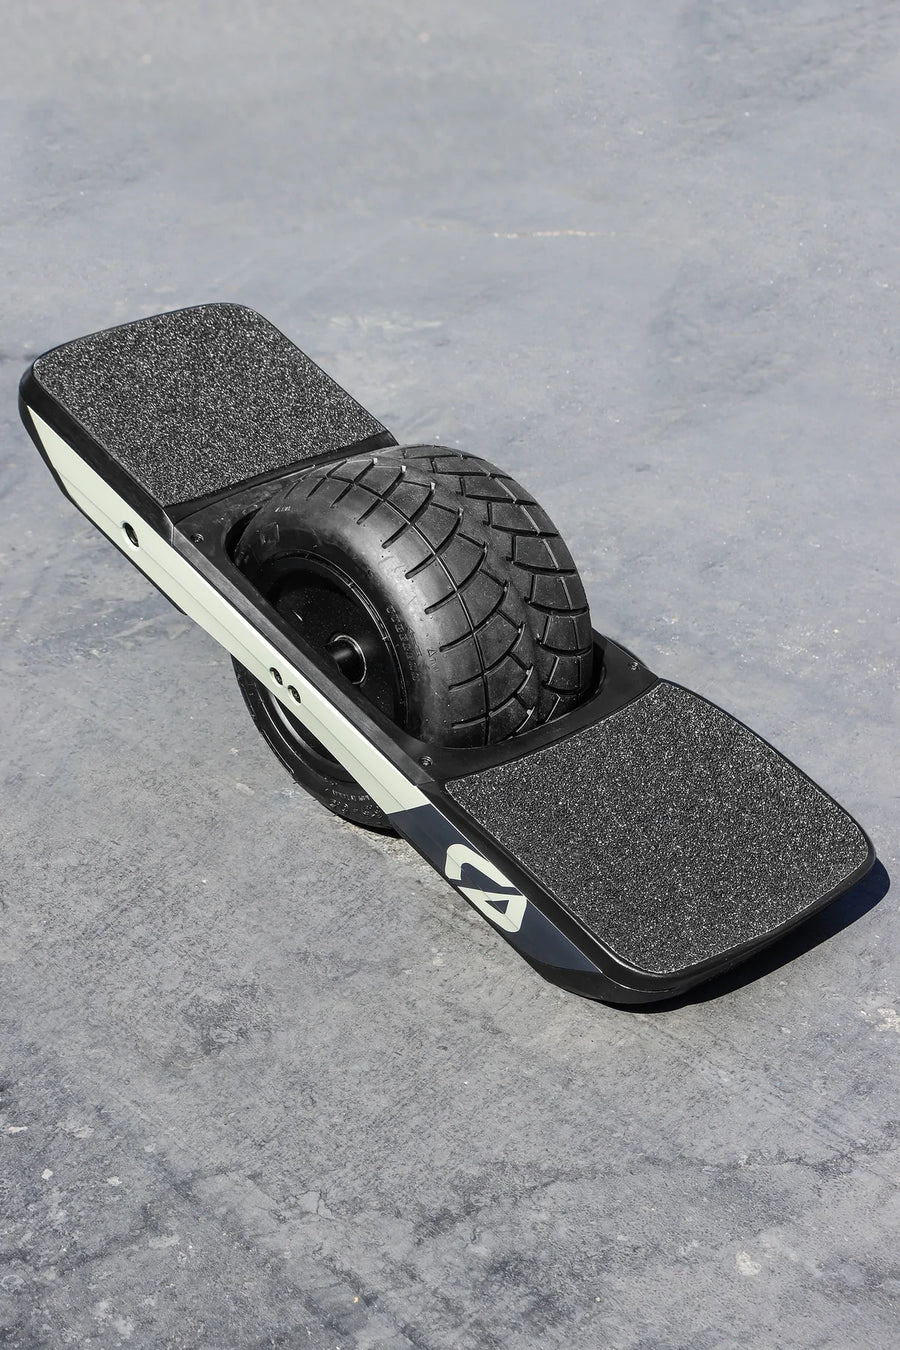 Craft&Ride OneTail Flare Concave Foot Pad for Onewheel GT